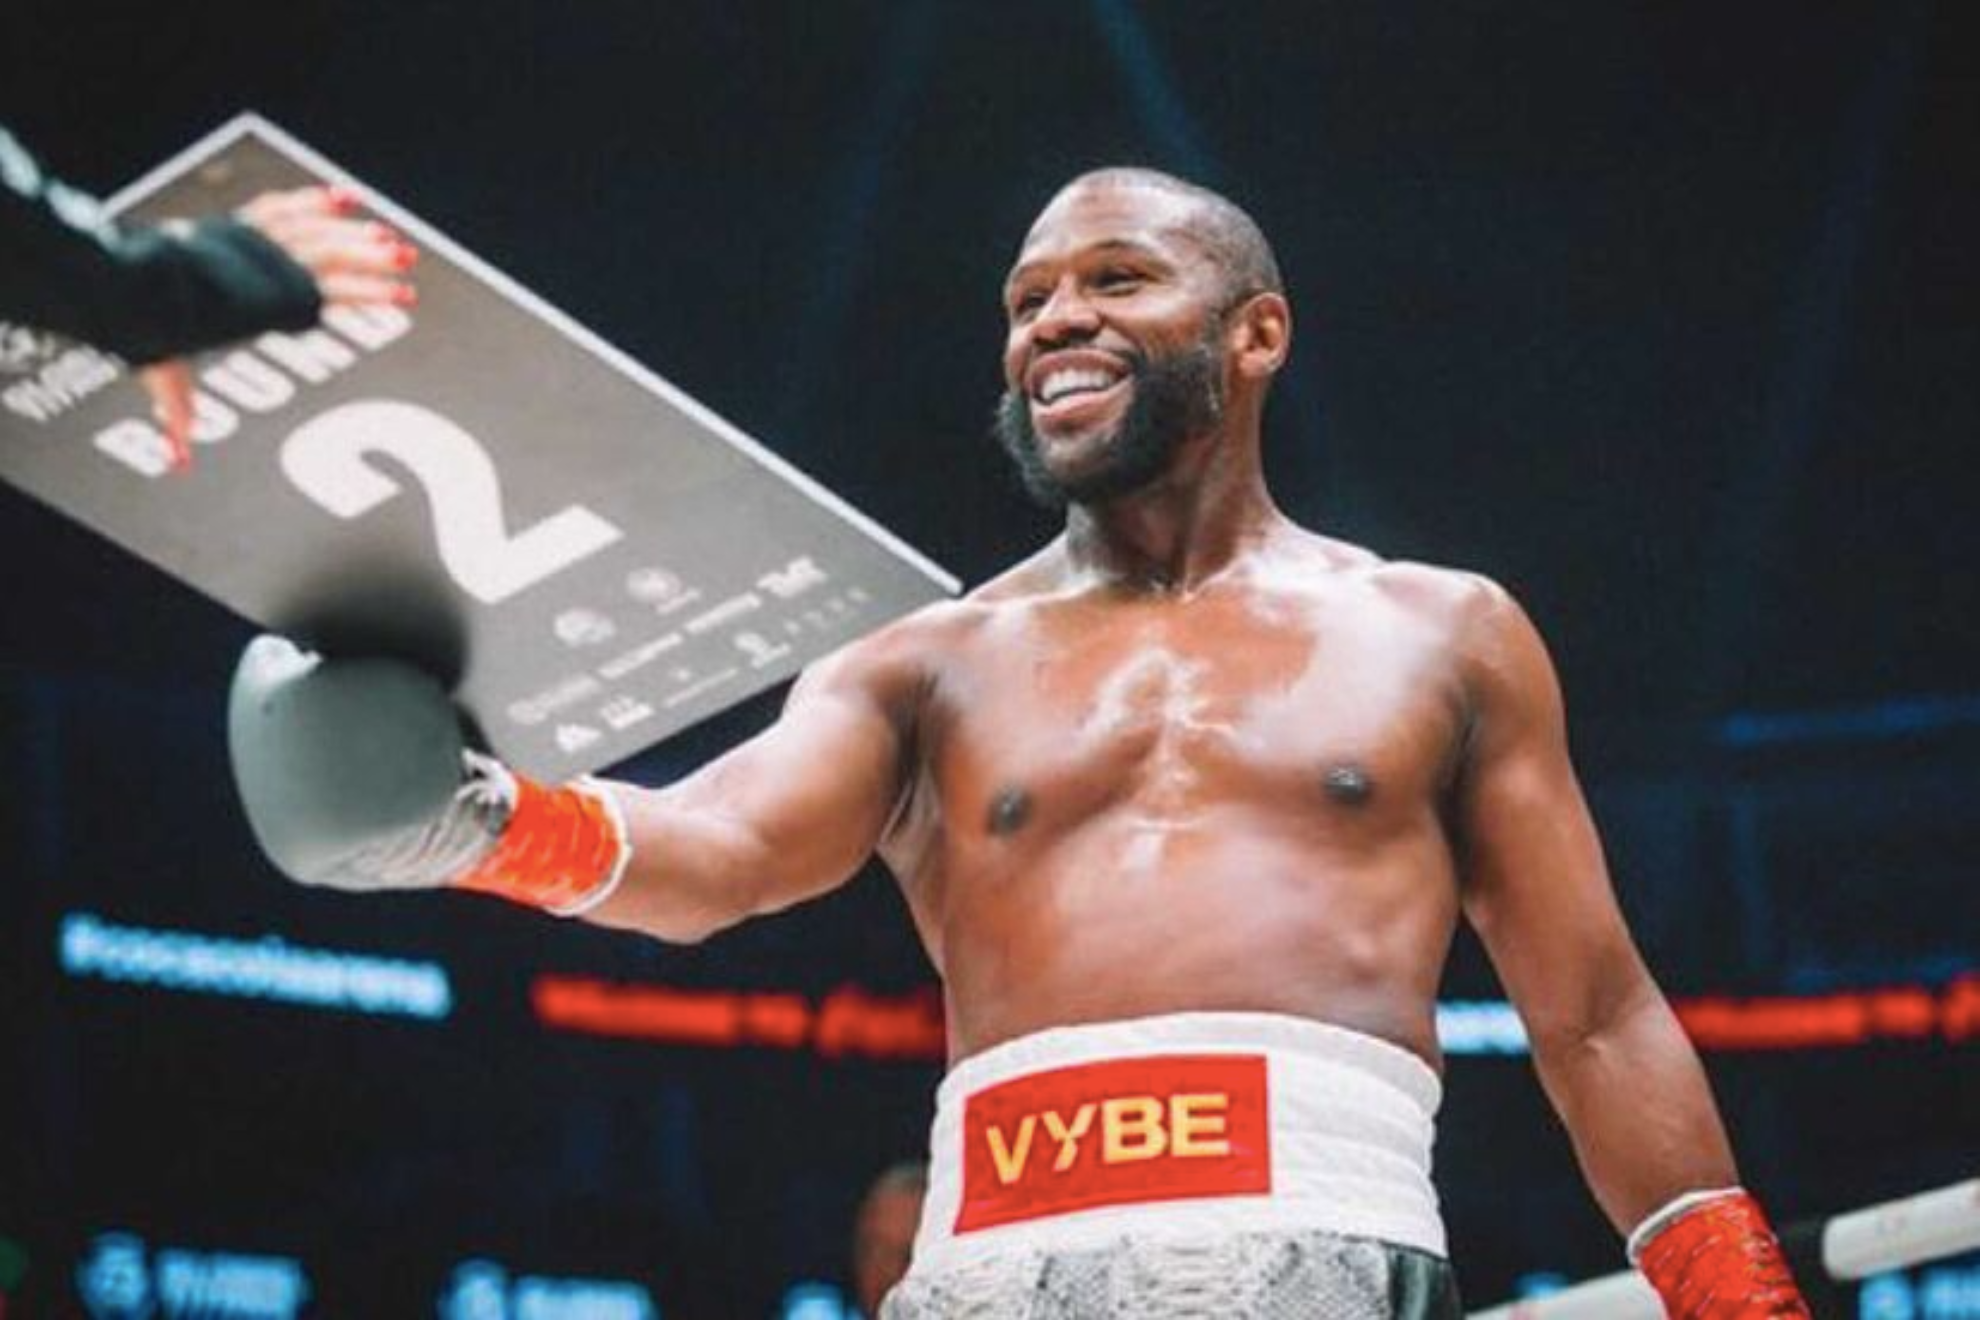 Jeff Mayweather defends his nephew, Floyds physical condition